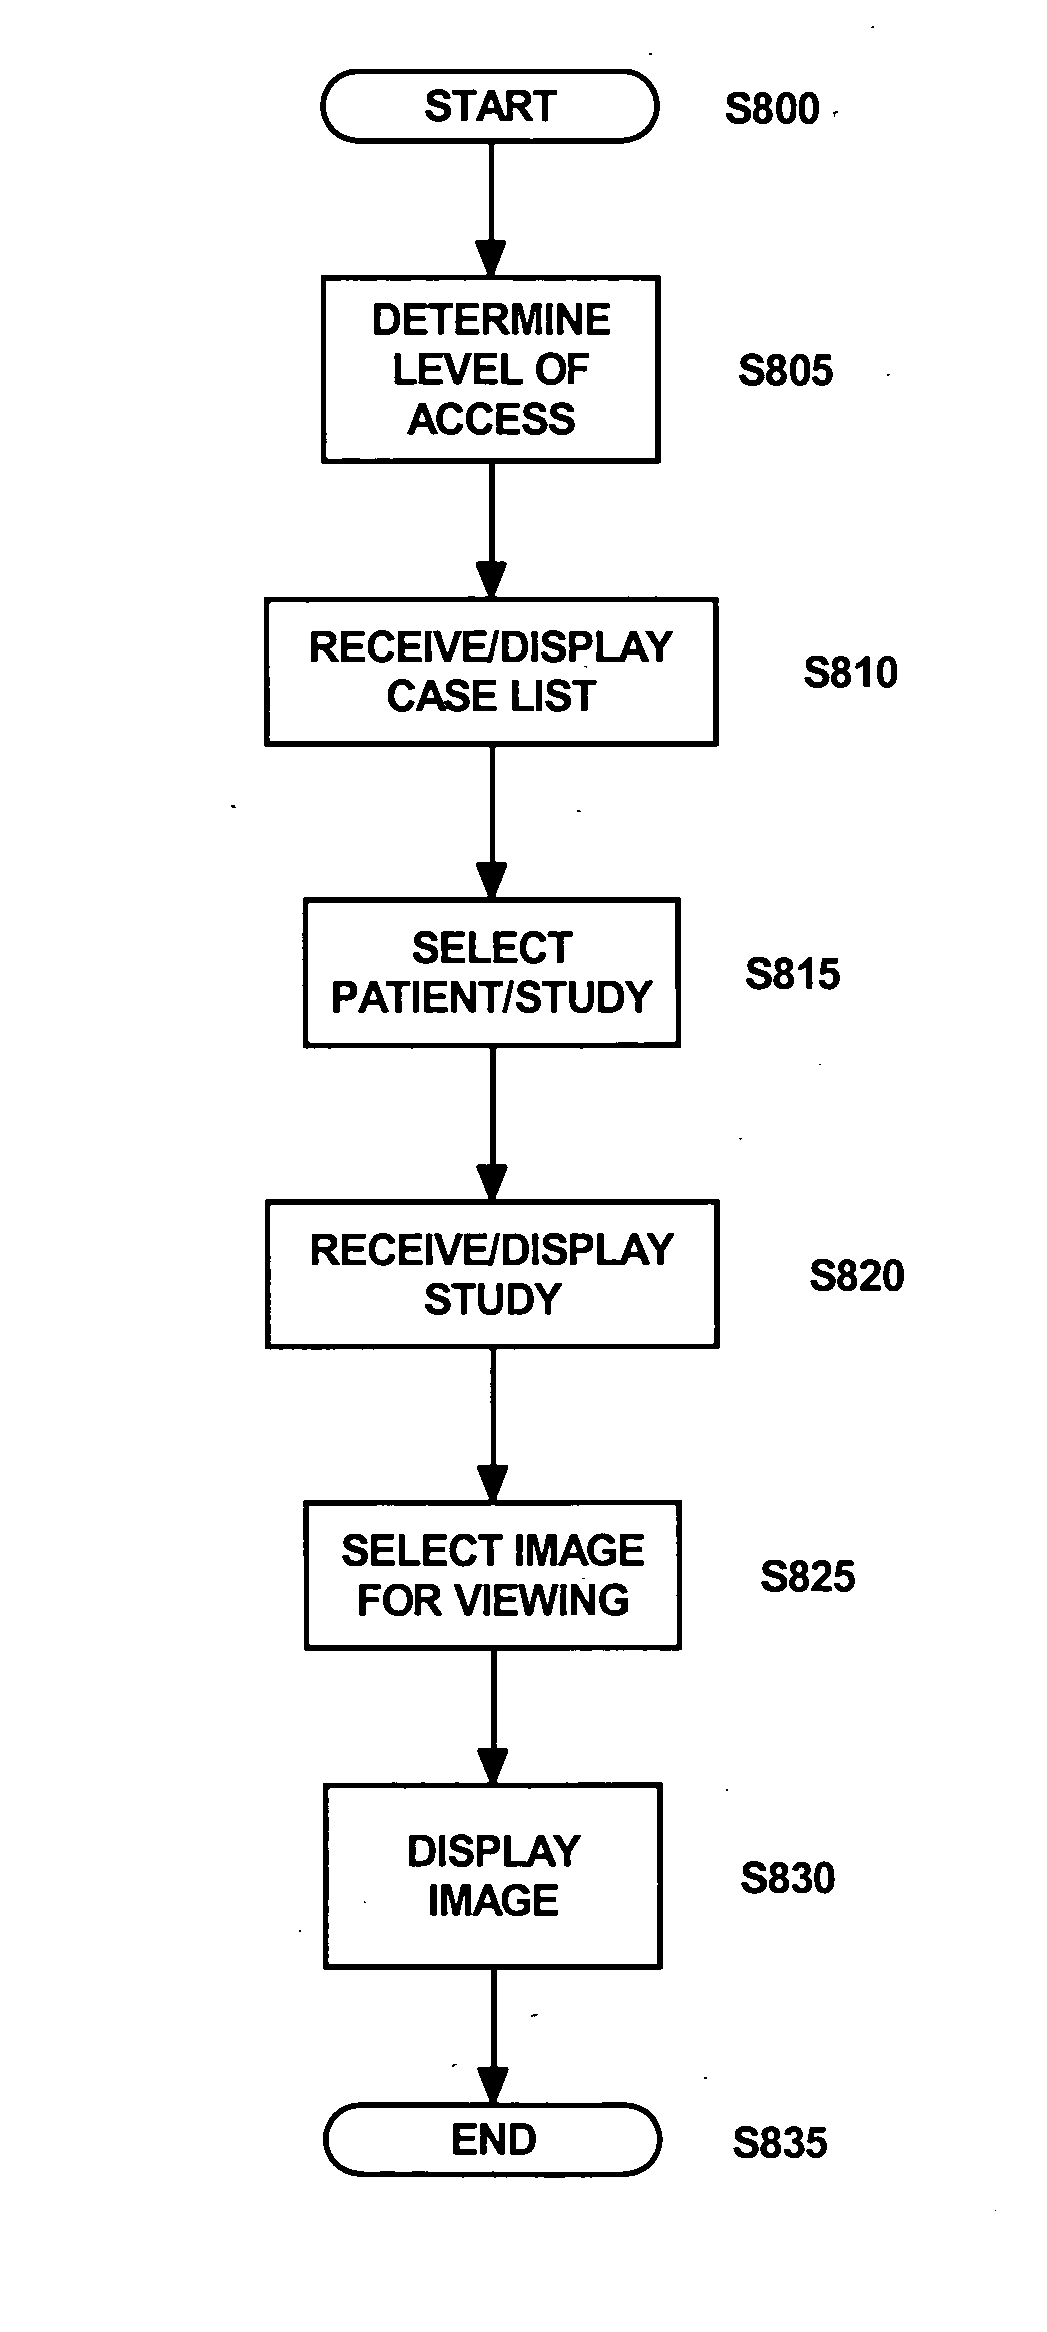 Method for payer access to medical image data